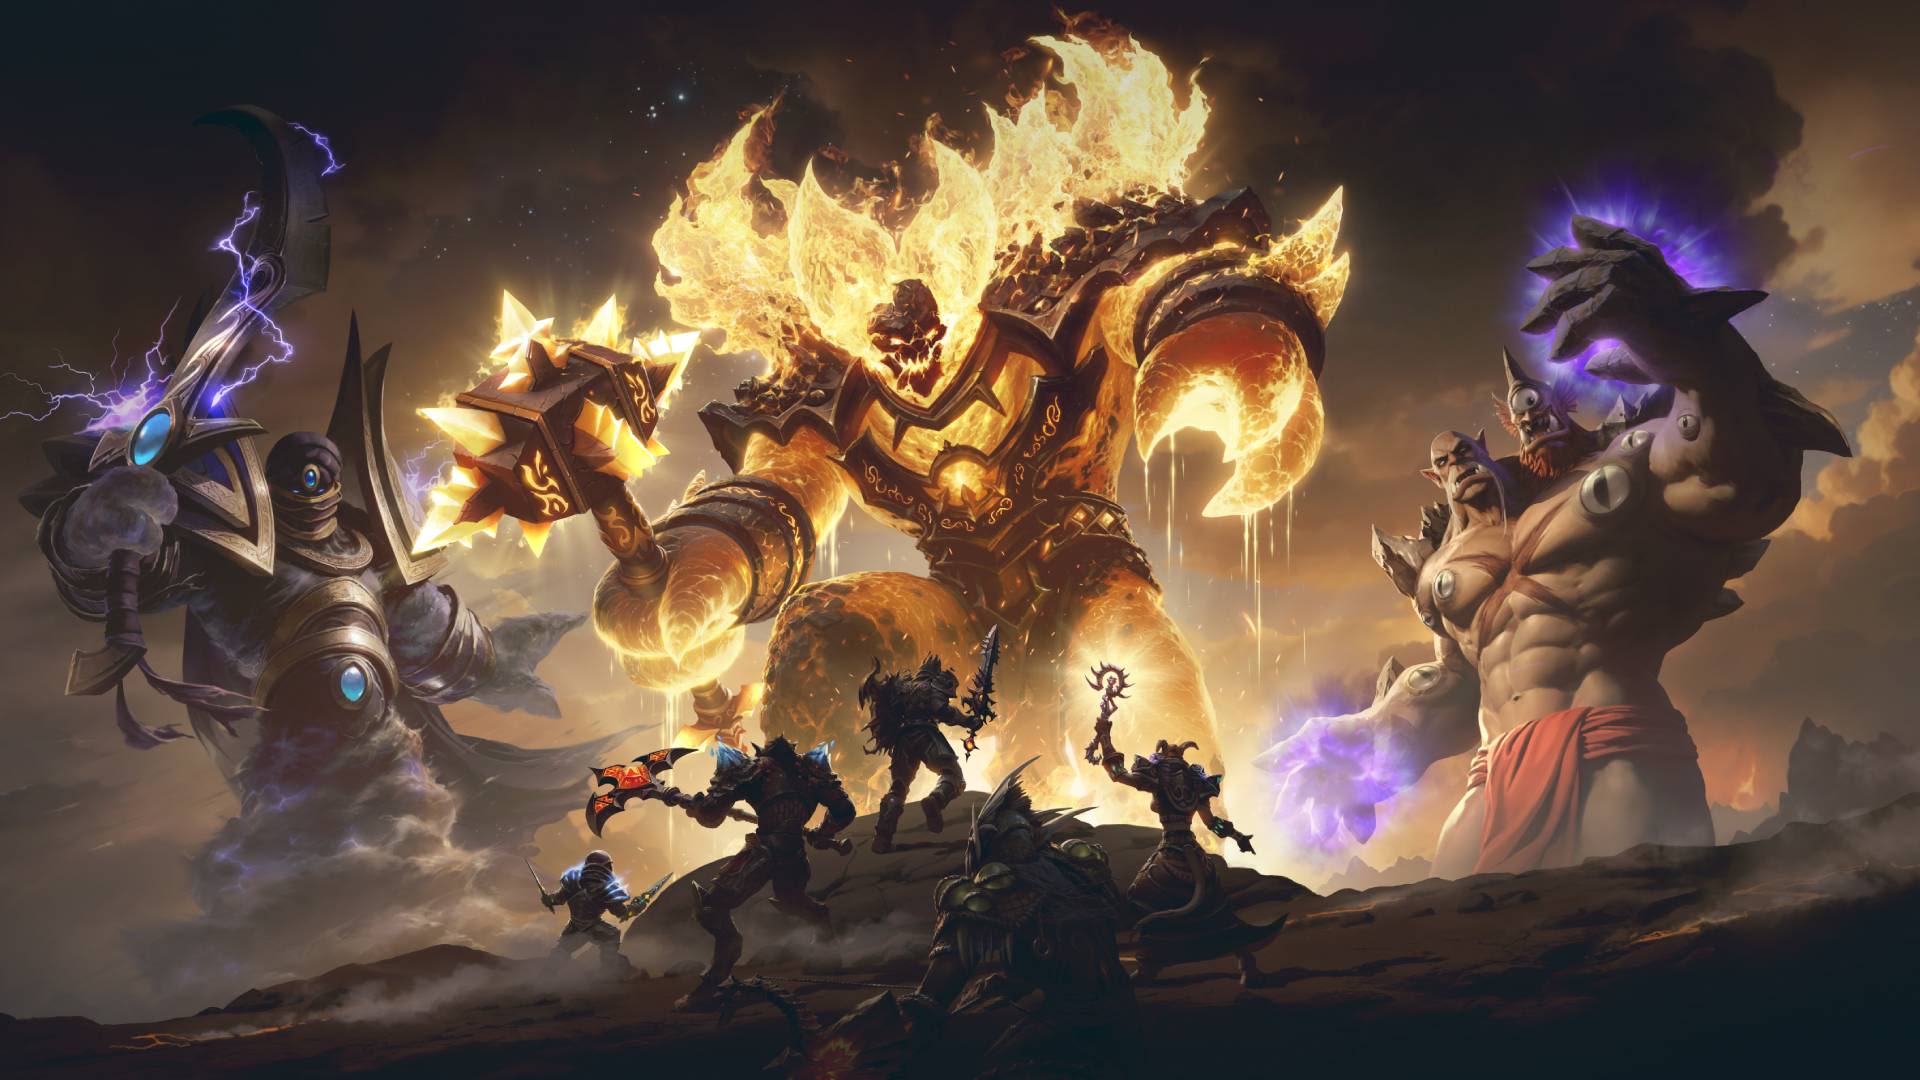 Former World of Warcraft lead speaks out on the problem plaguing MMO combat – the "bajillion buff and debuff icons"